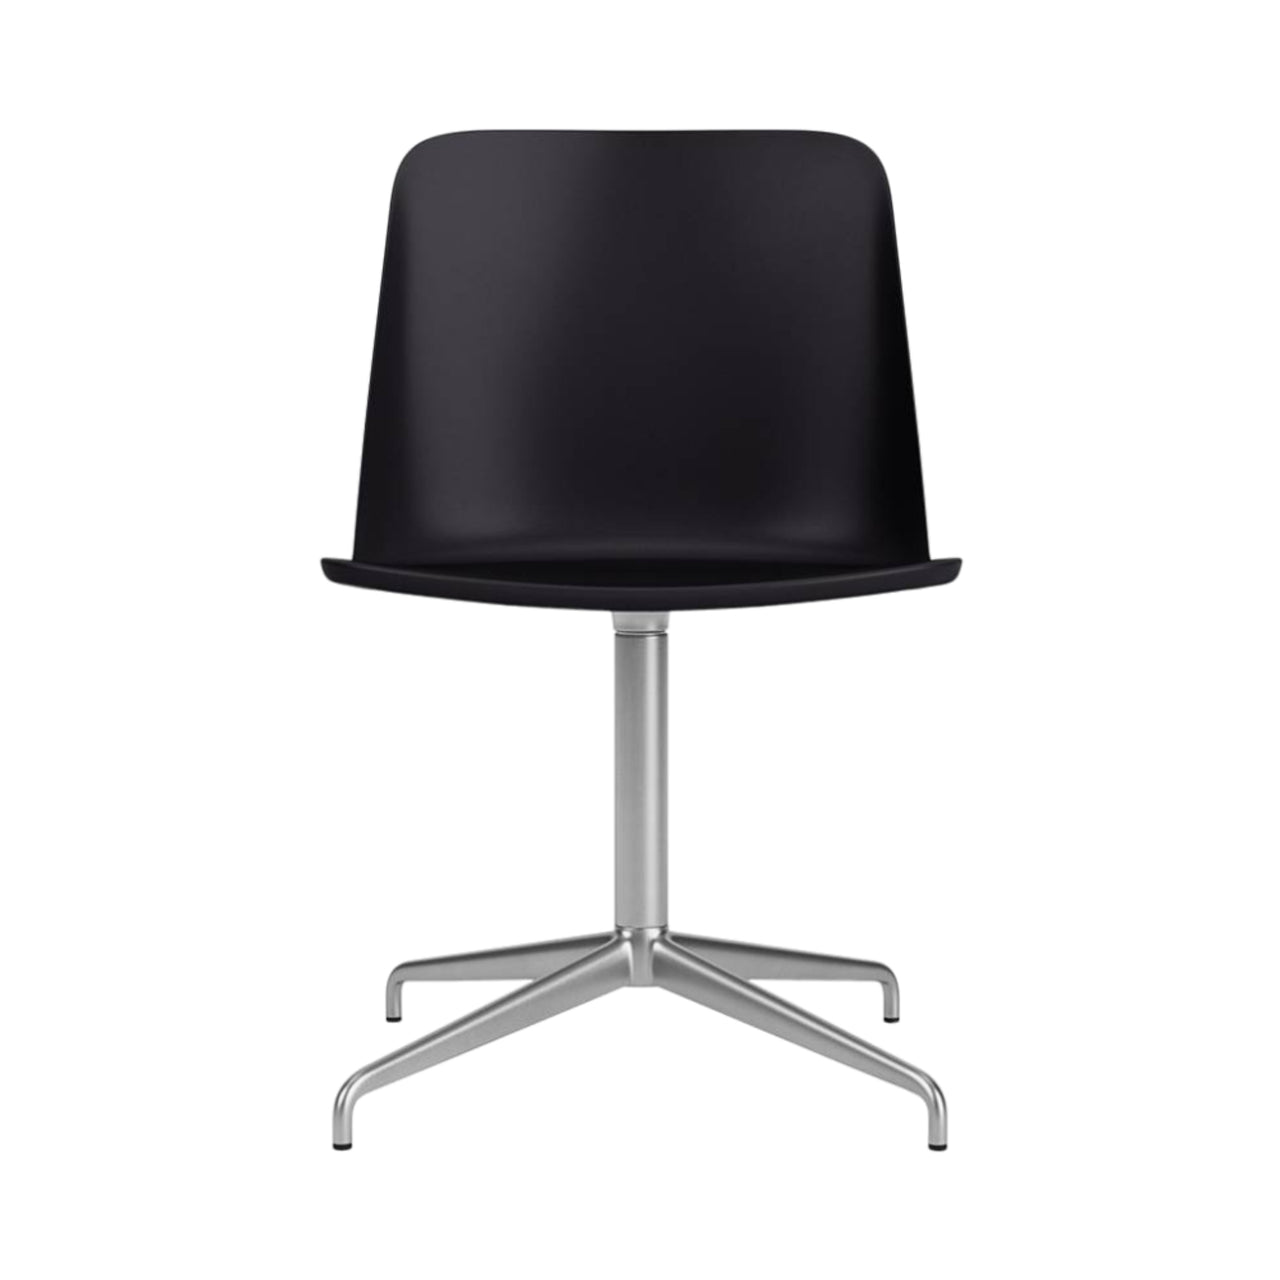 Rely Chair HW16: Black + Polished Aluminum